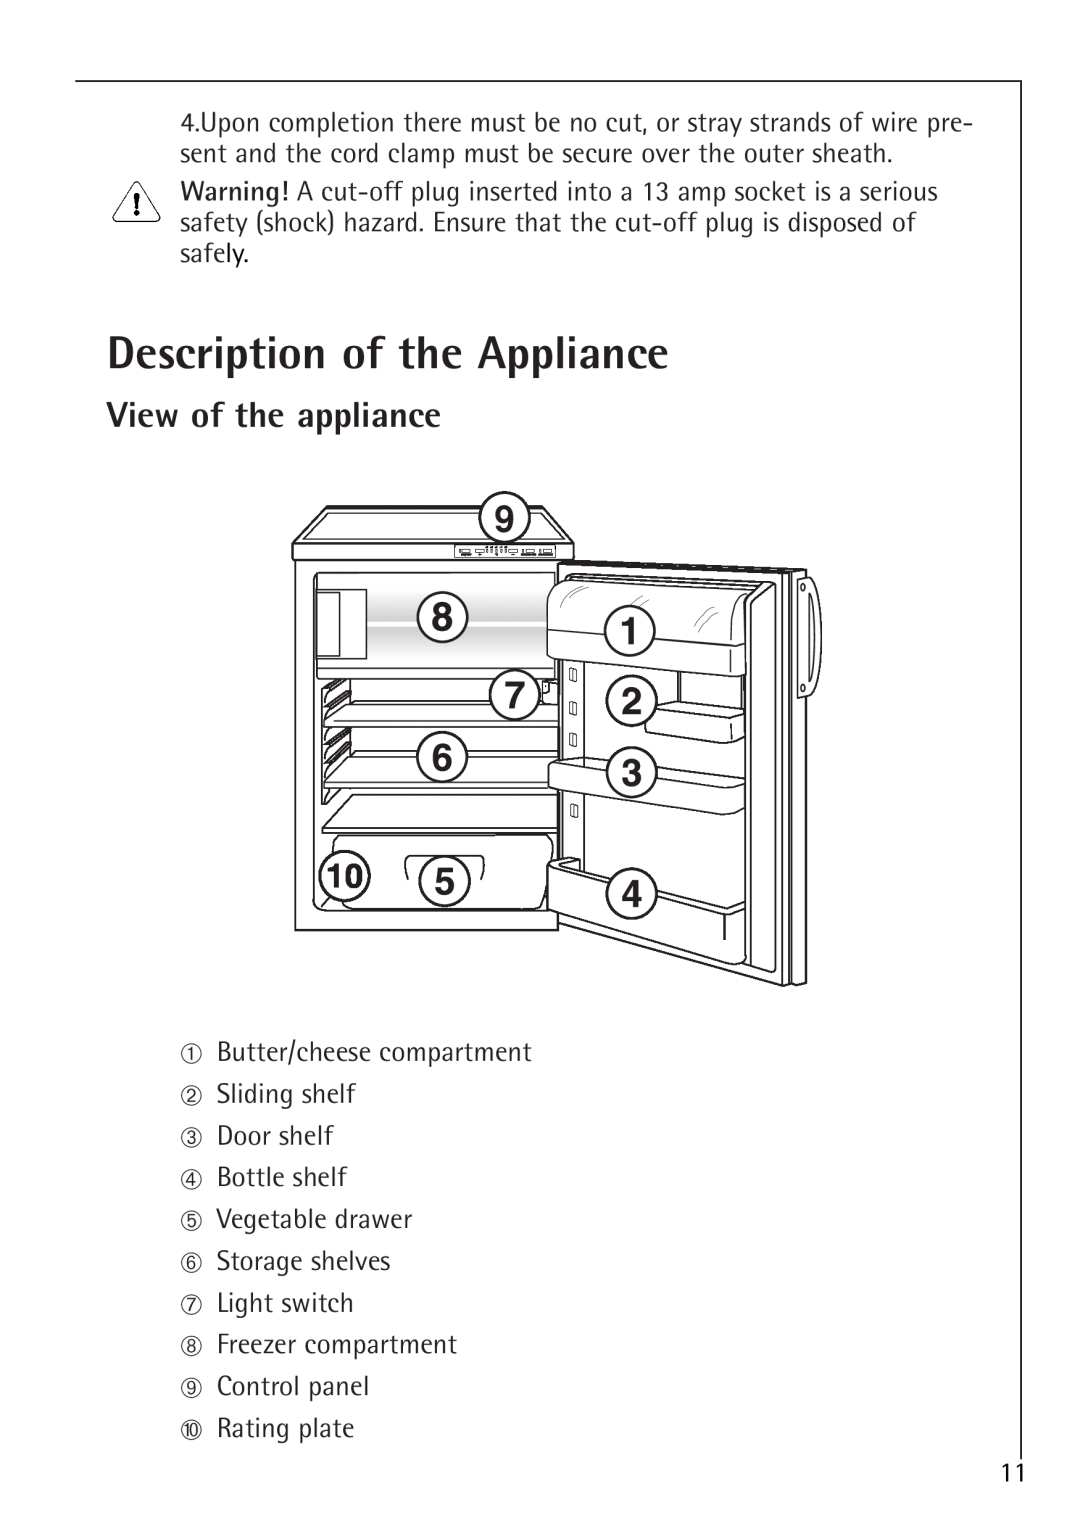 Electrolux 1583-8 TK operating instructions Description of the Appliance, View of the appliance 